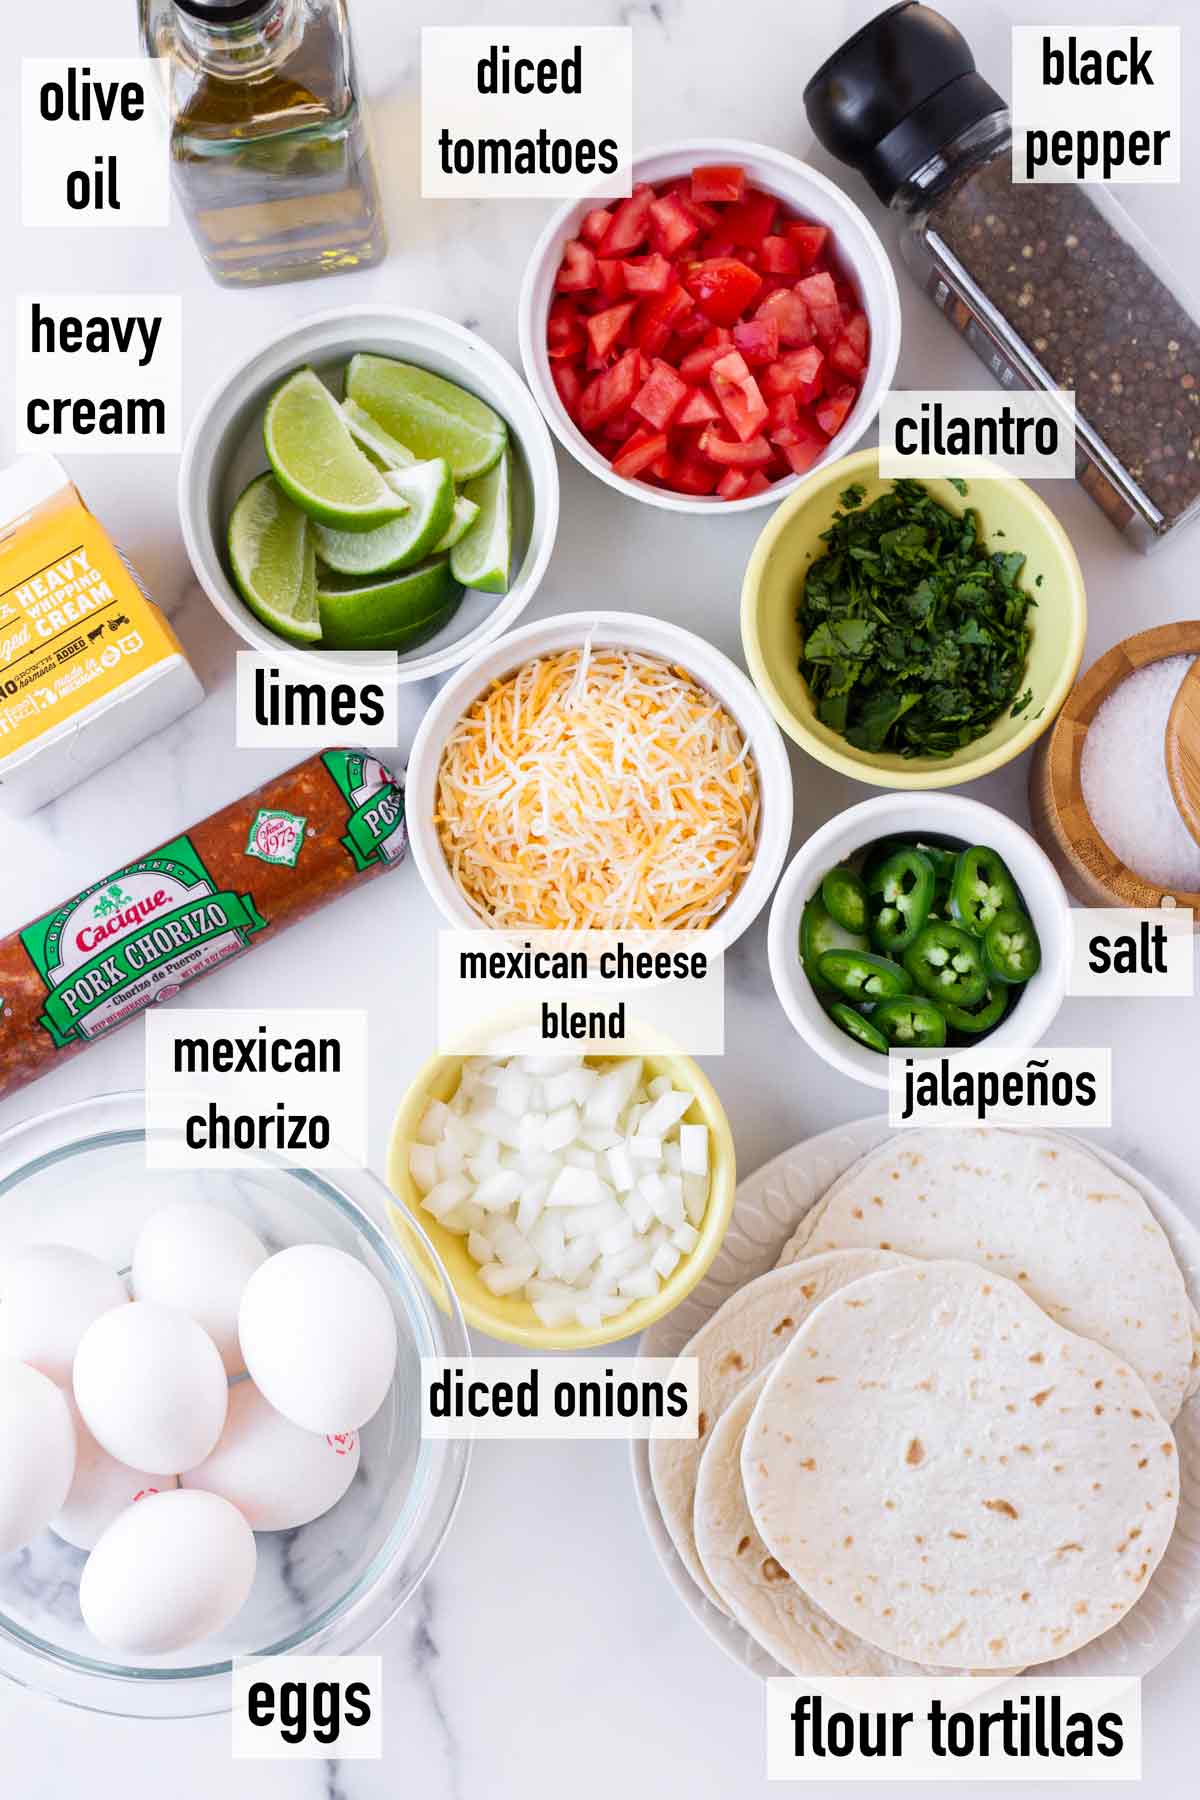 labeled ingredients to make chorizo tacos with egg